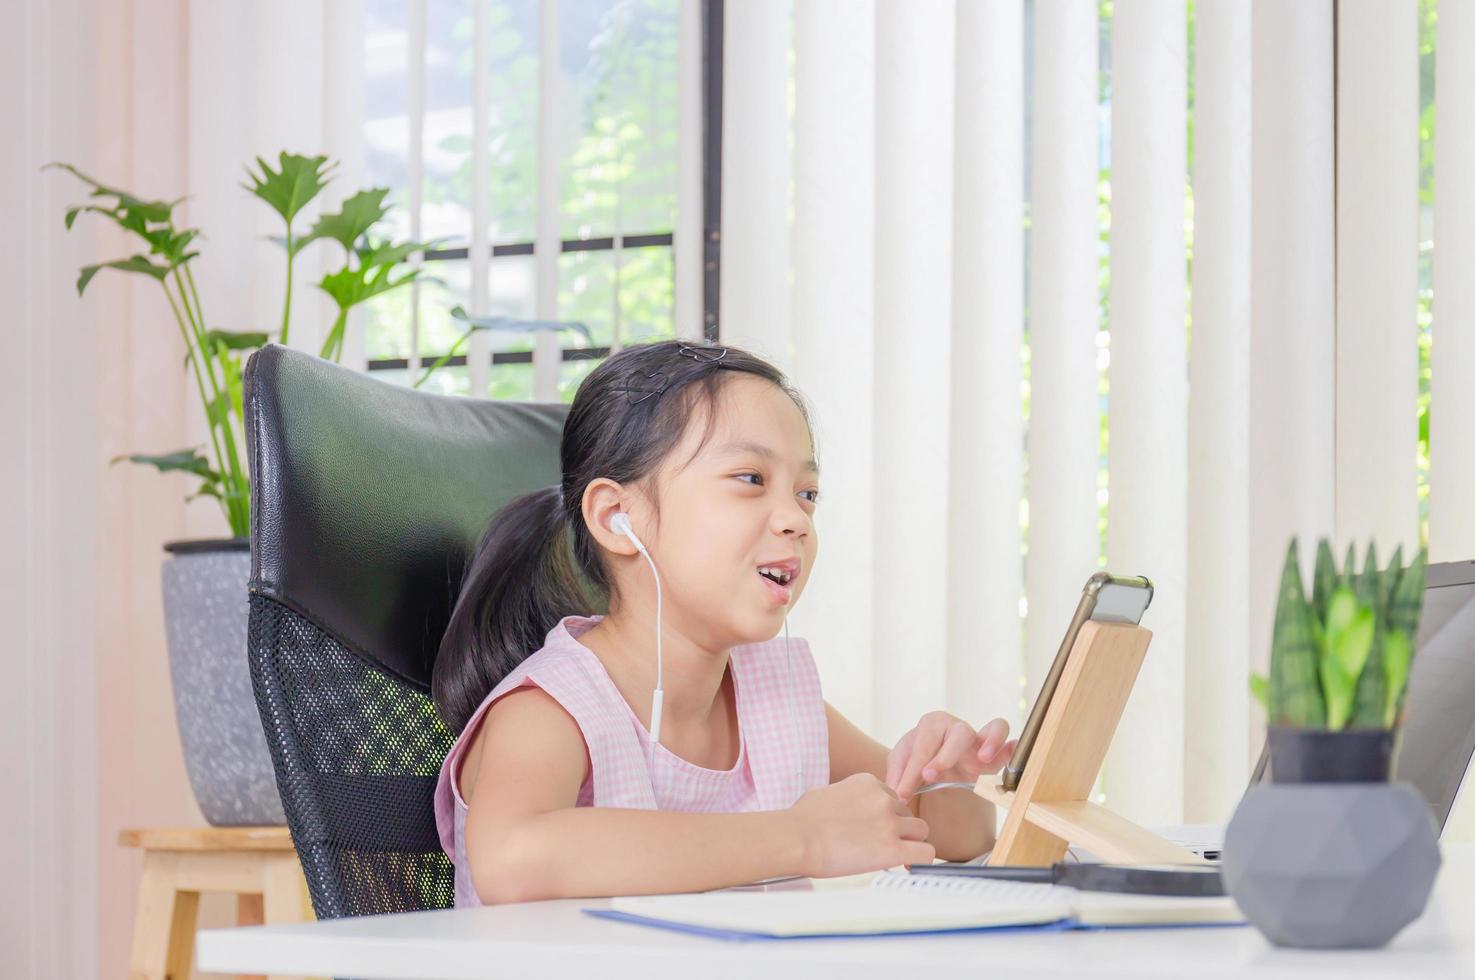 Cheerful little girl smiling and while using laptop and wireless earphone for video call, Education and distant learning concept photo